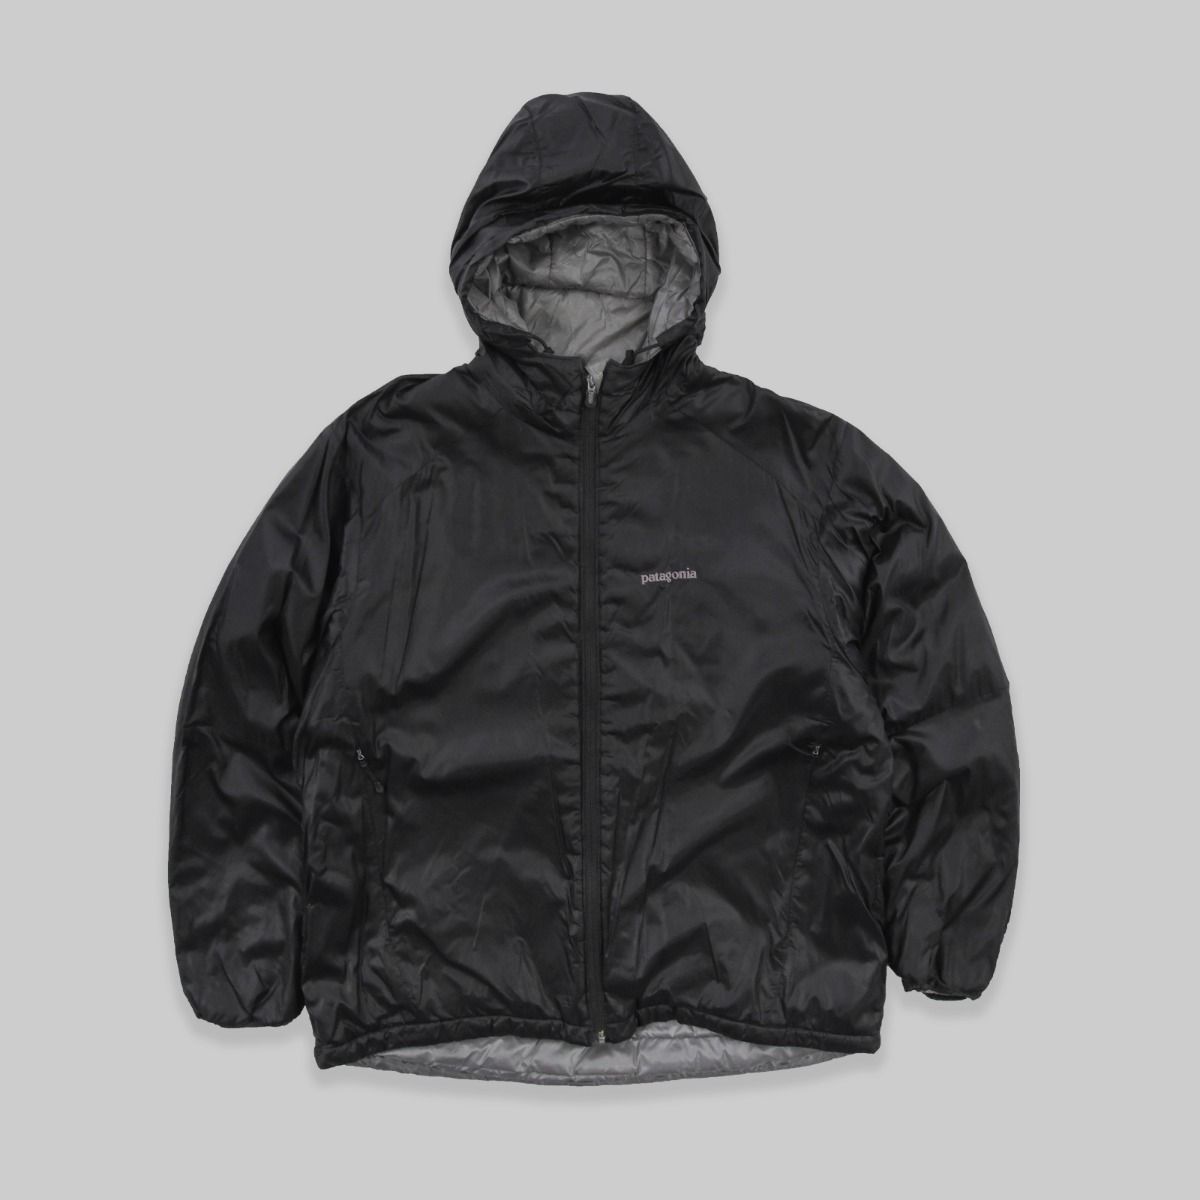 Patagonia Puffball Hooded Jacket